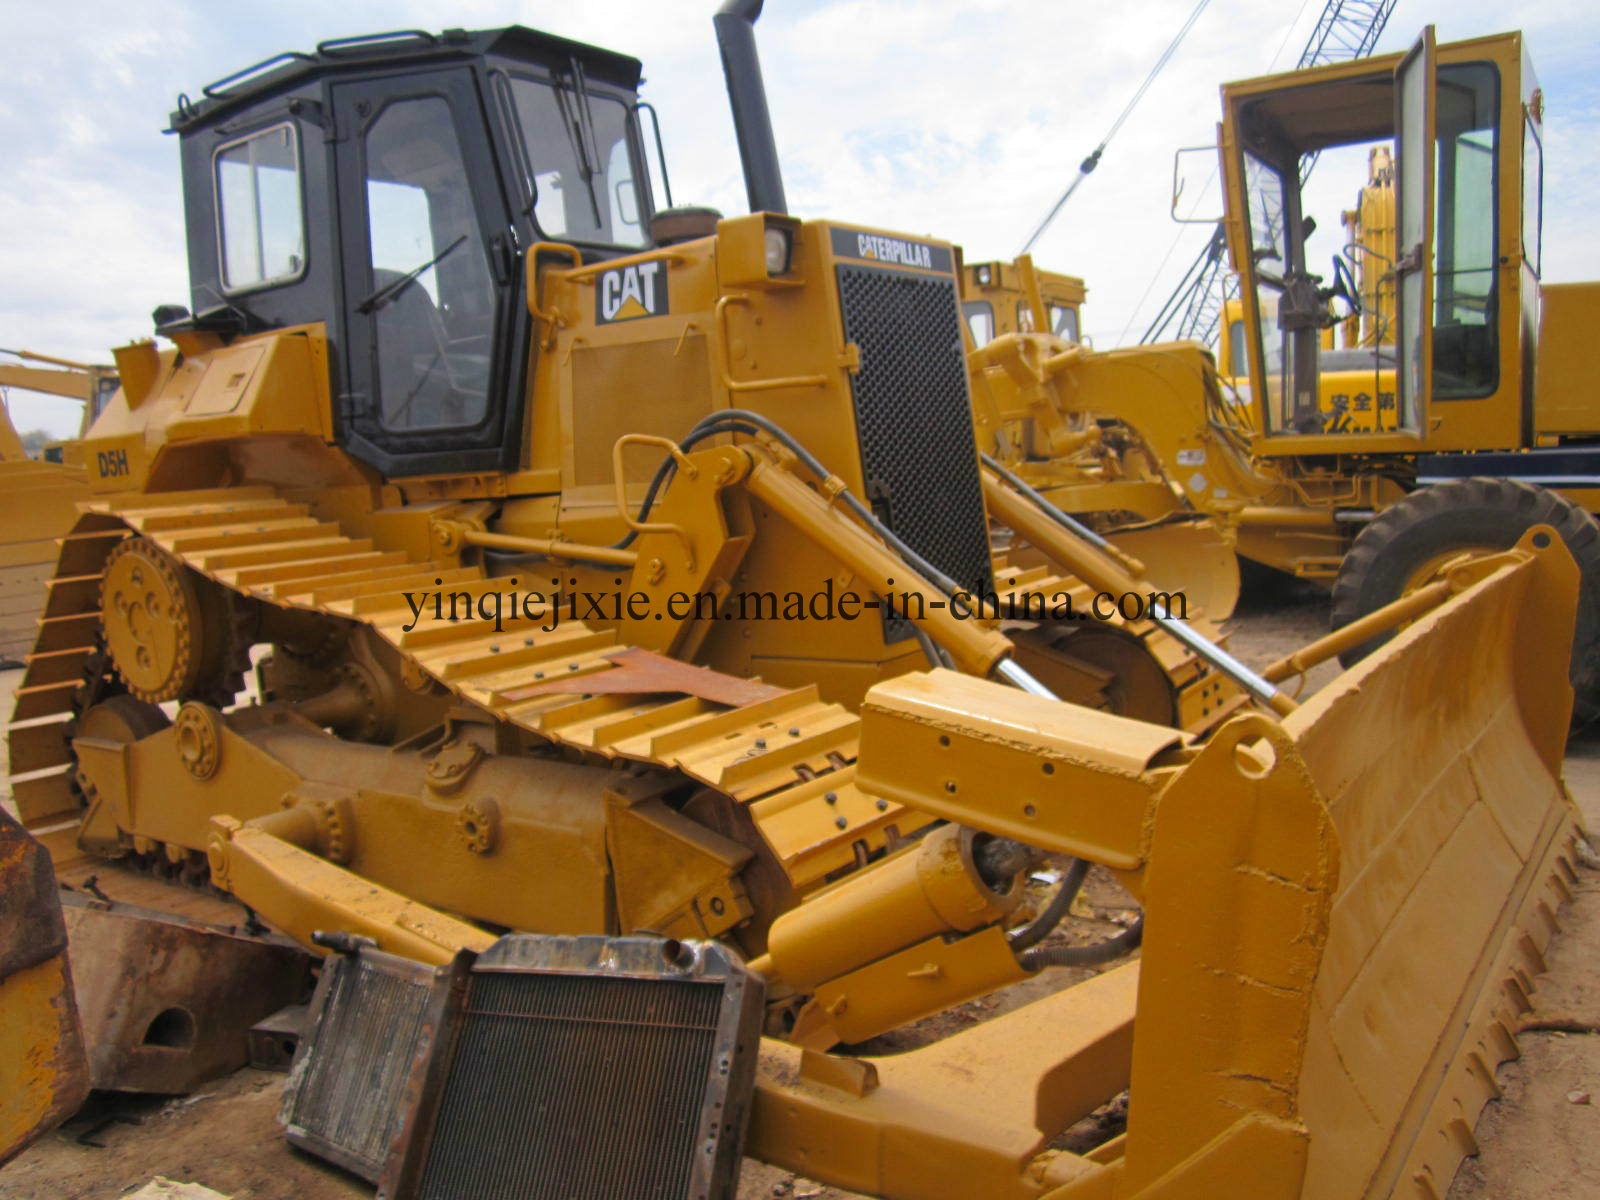 Great Condition in Caterpillar D5h Bulldozer/Used Cat D5h Bulldozer for Sale